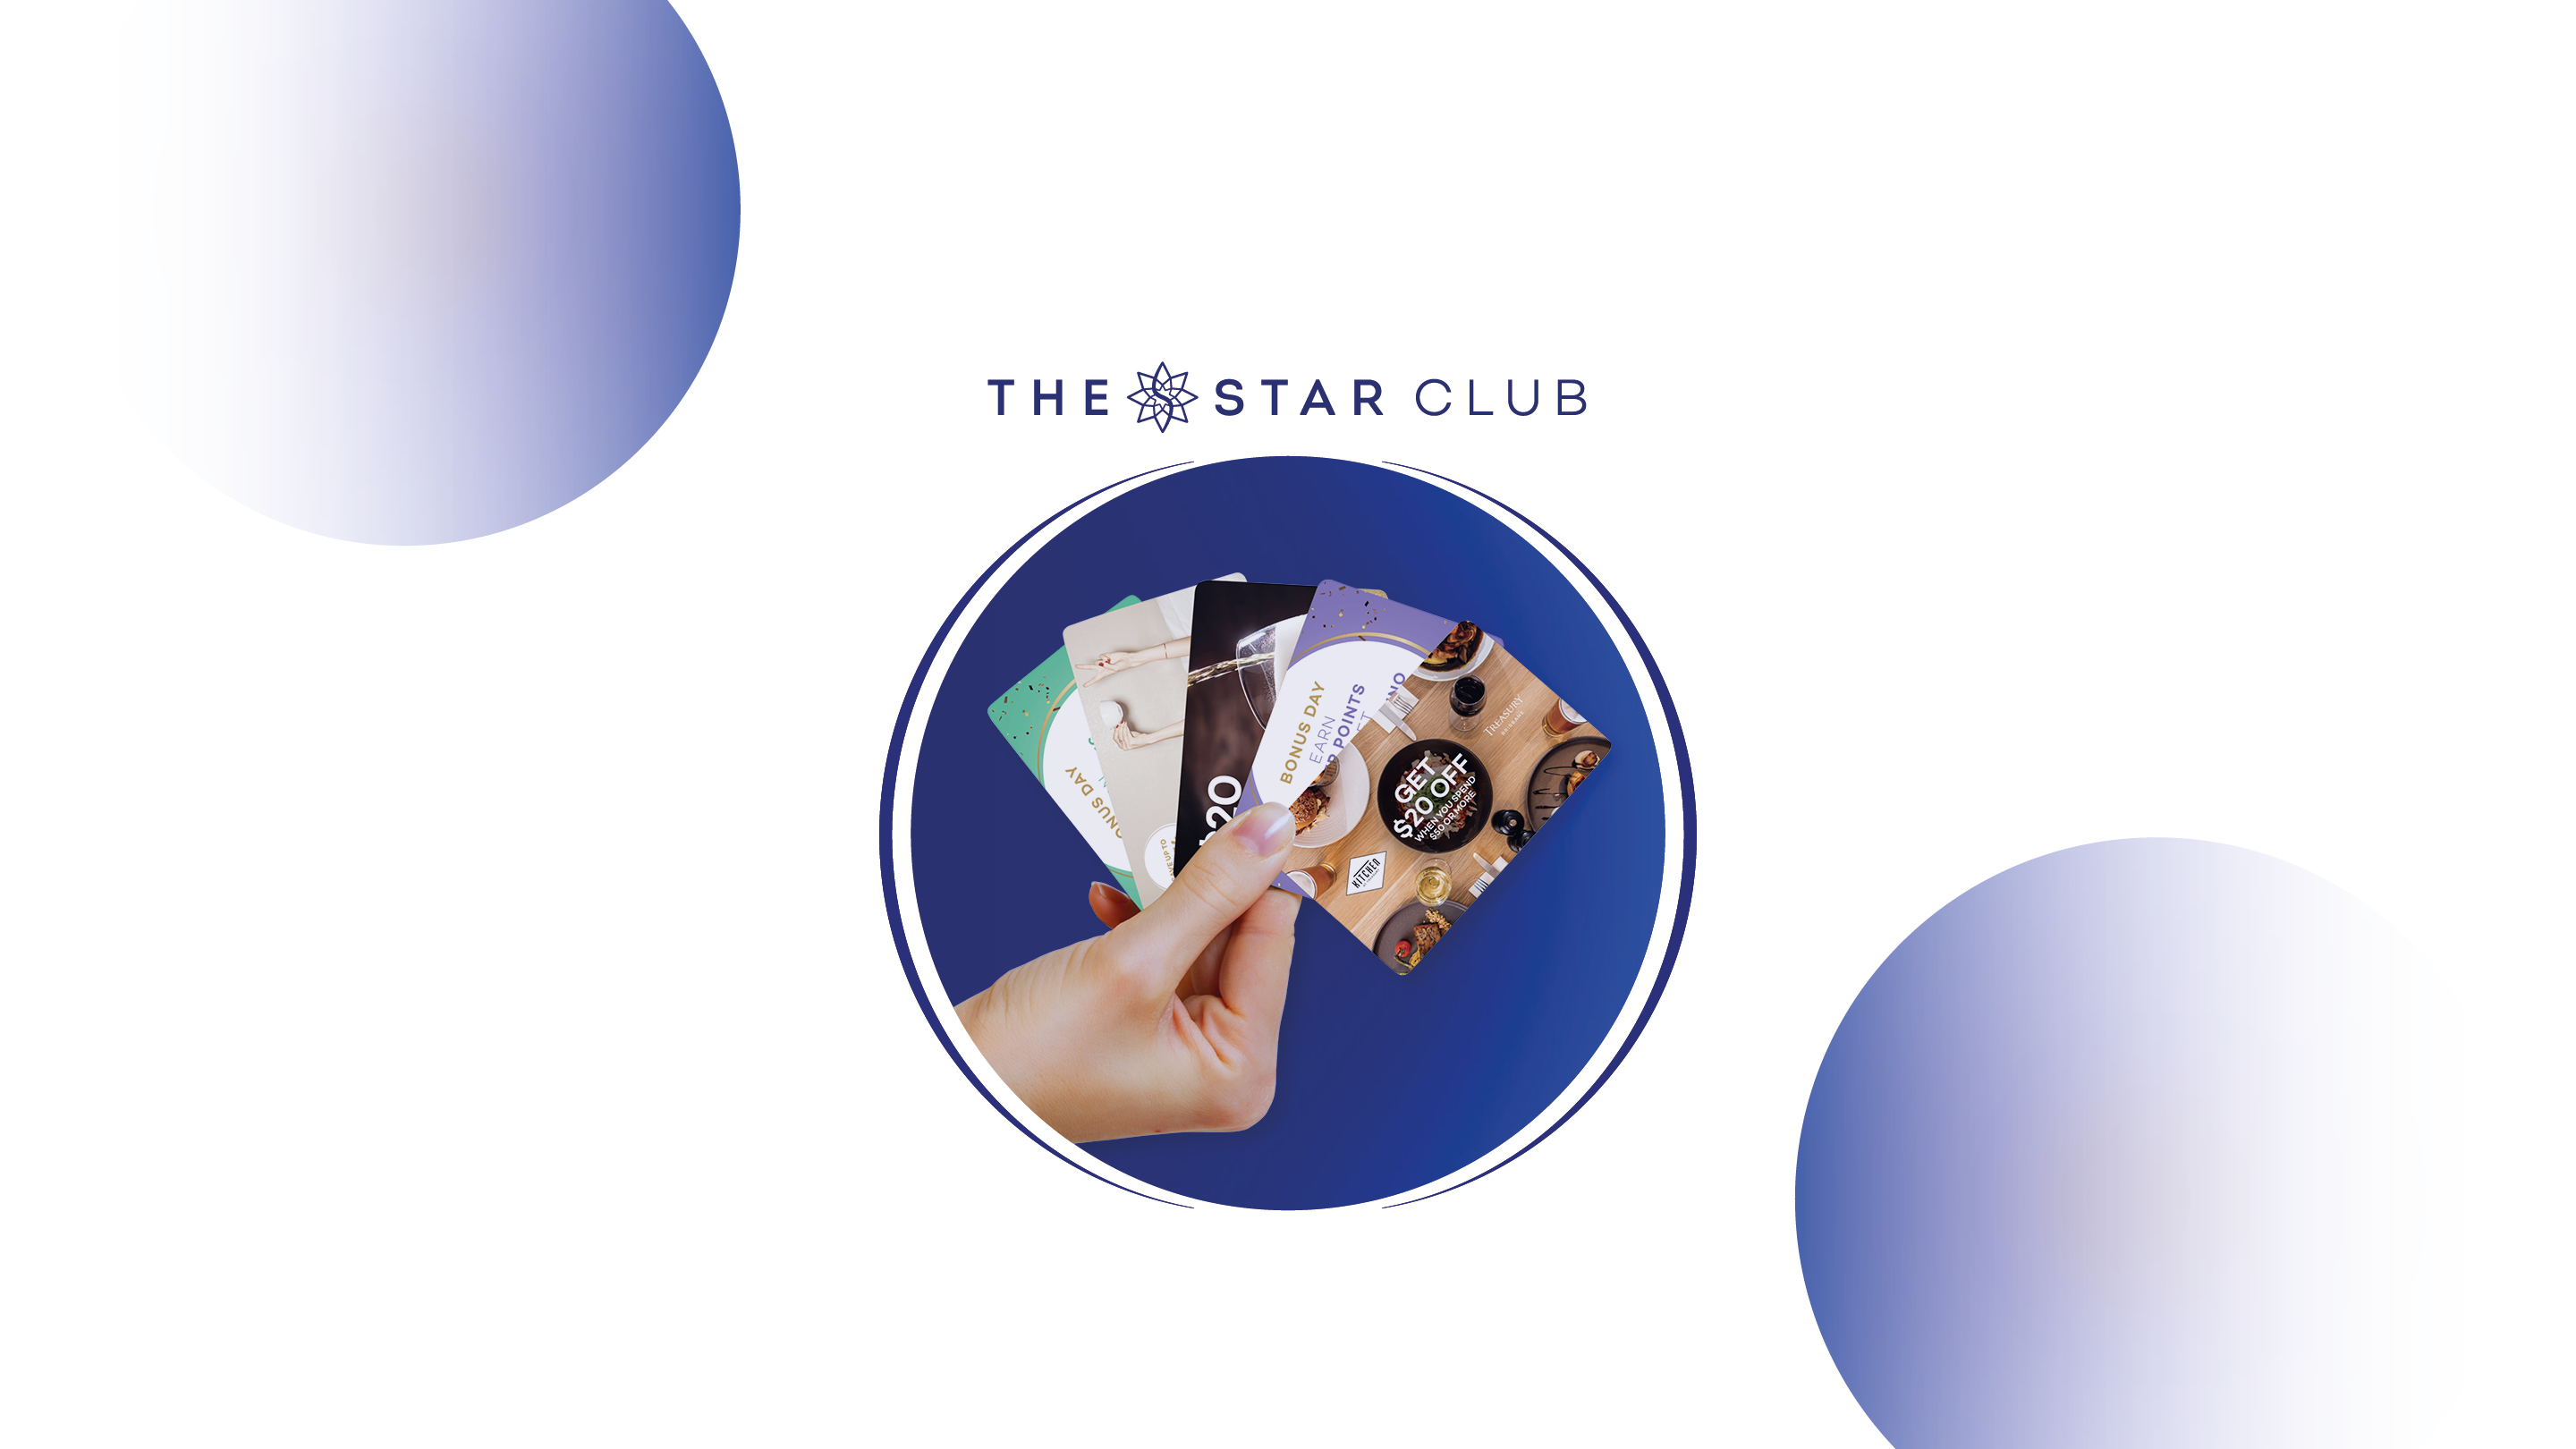 Get more when you join The Star Club | The Star Club